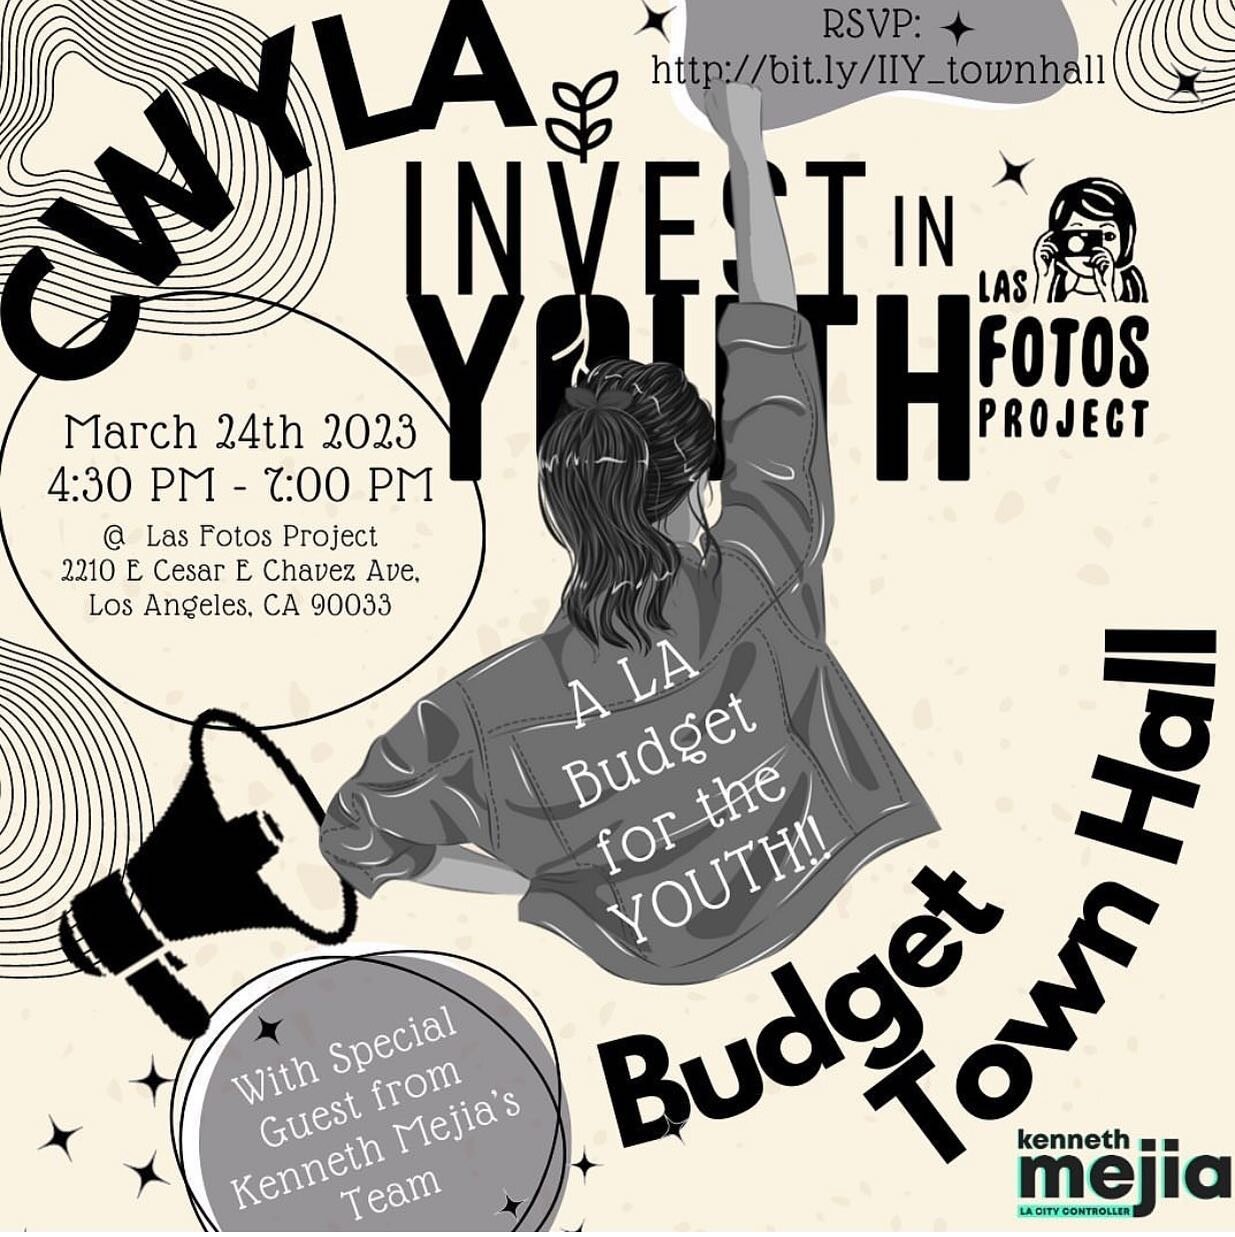 Join @investinyouthco &lsquo;s Budget Townhall today! 📢✊🏿✊🏽✊🏾✊🏽 RSVP in their bio! Let LA City know youths&rsquo; demand for this years budget!